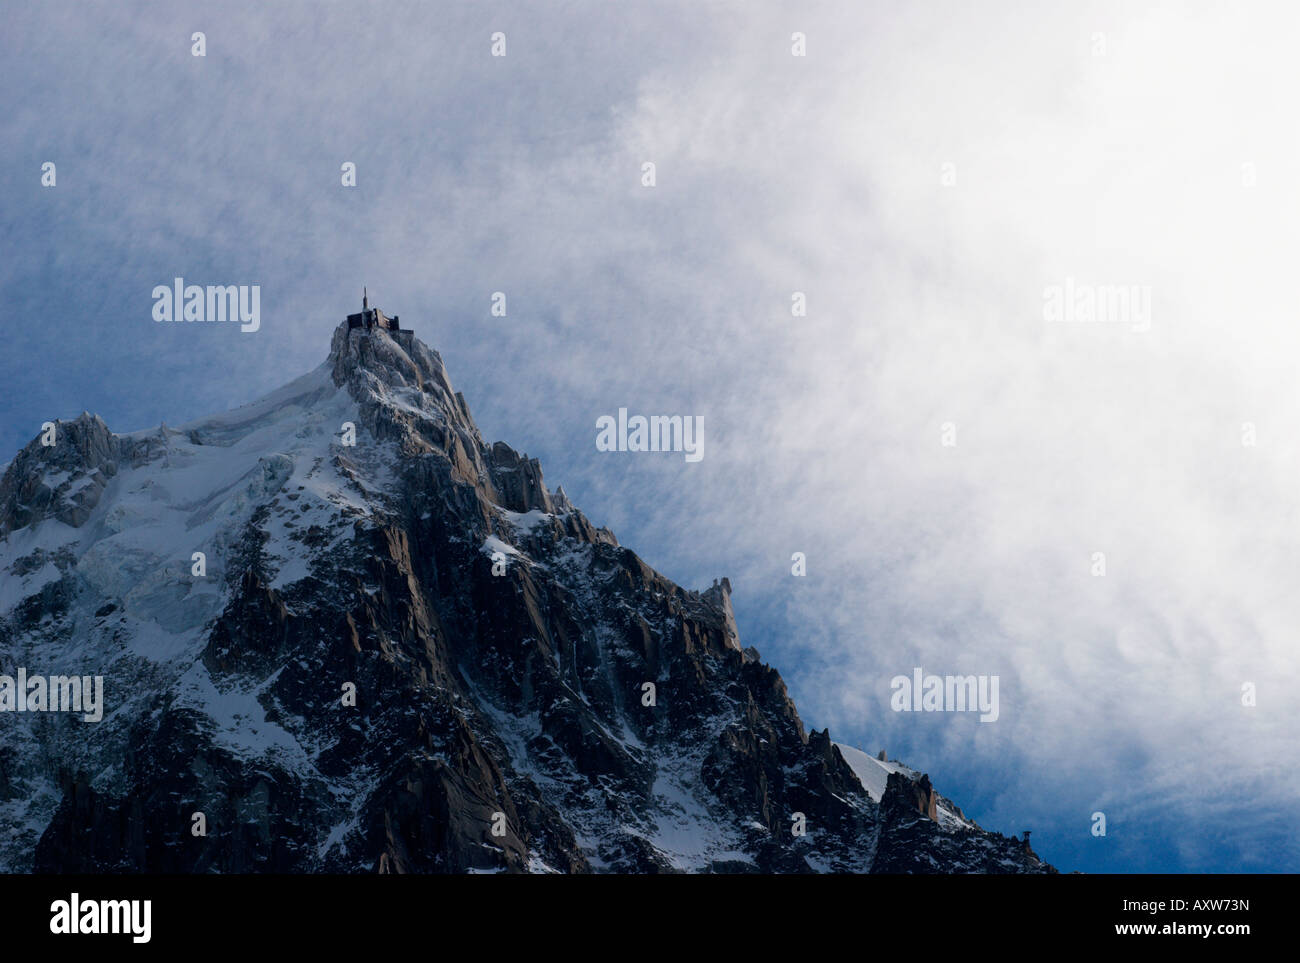 High winds and spectacular clouds over frozen needle of Aiguille du Midi (3842m), Chamonix-Mont Blanc, France Stock Photo